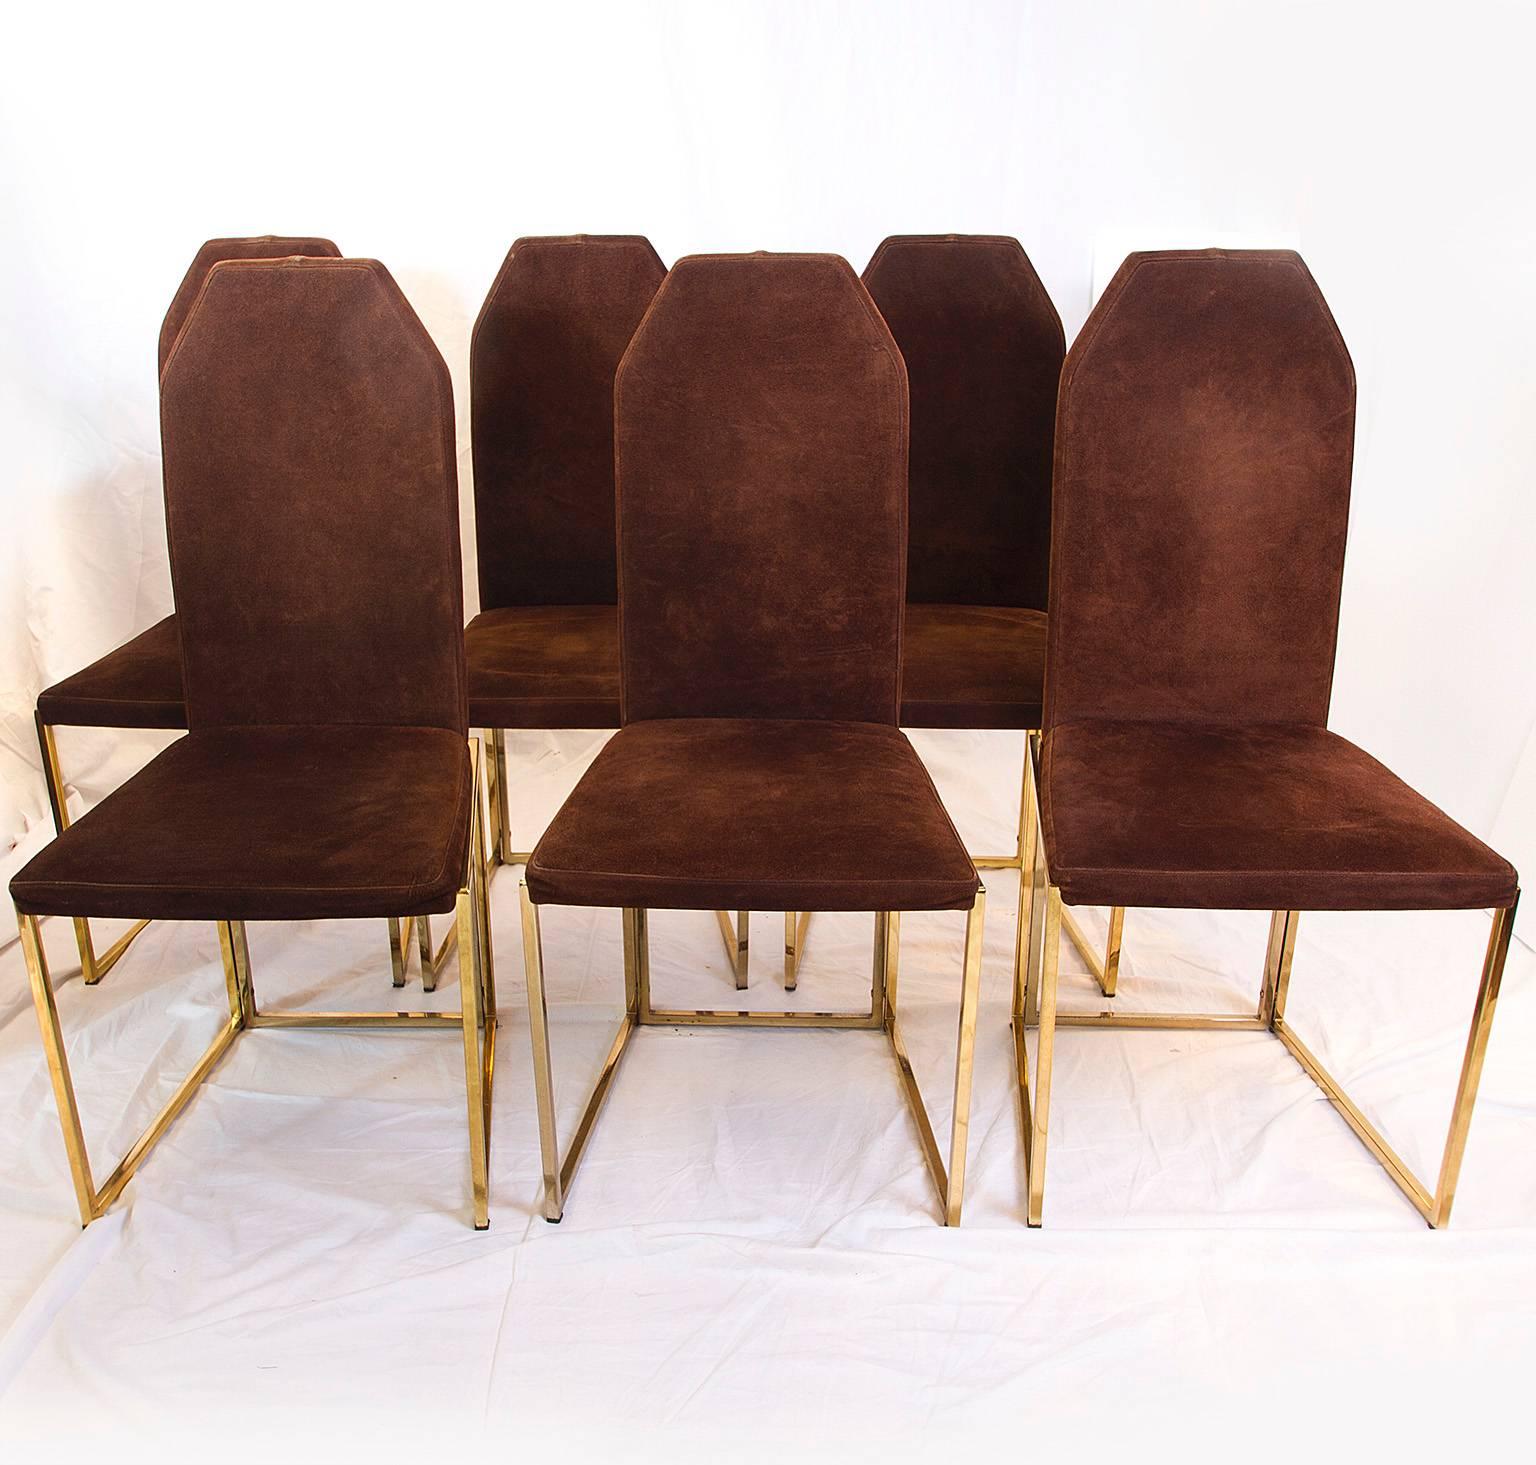 Six golden lacquered steel and brown suede by Belgo Chrome. The suede is in superb condition, just slightly worn on the heads of the seats. The seating foams should ideally be changed as they are a little too soft.

Please contact us for delivery